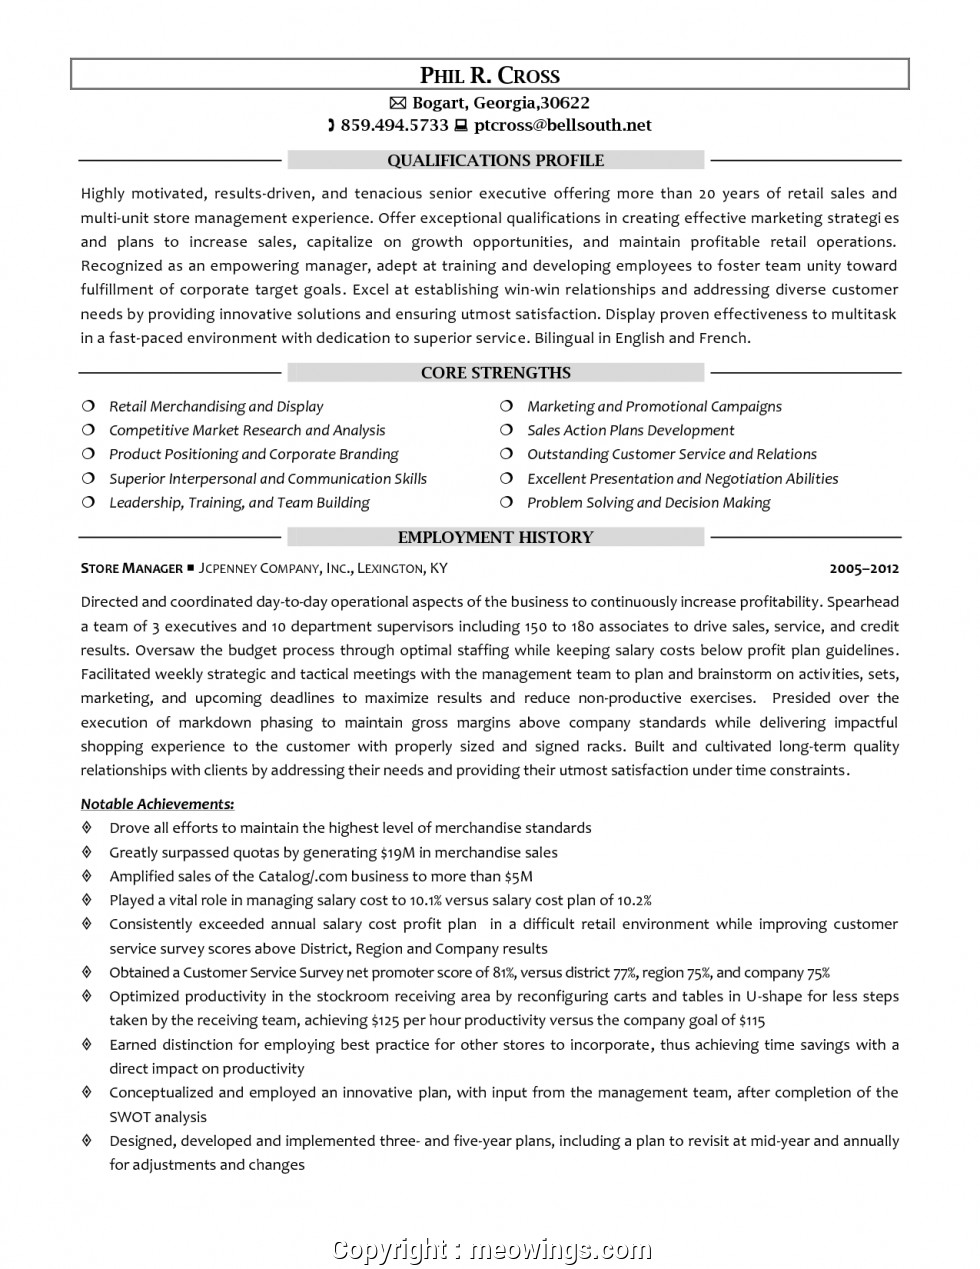 unique resume format for area sales manager in fmcg